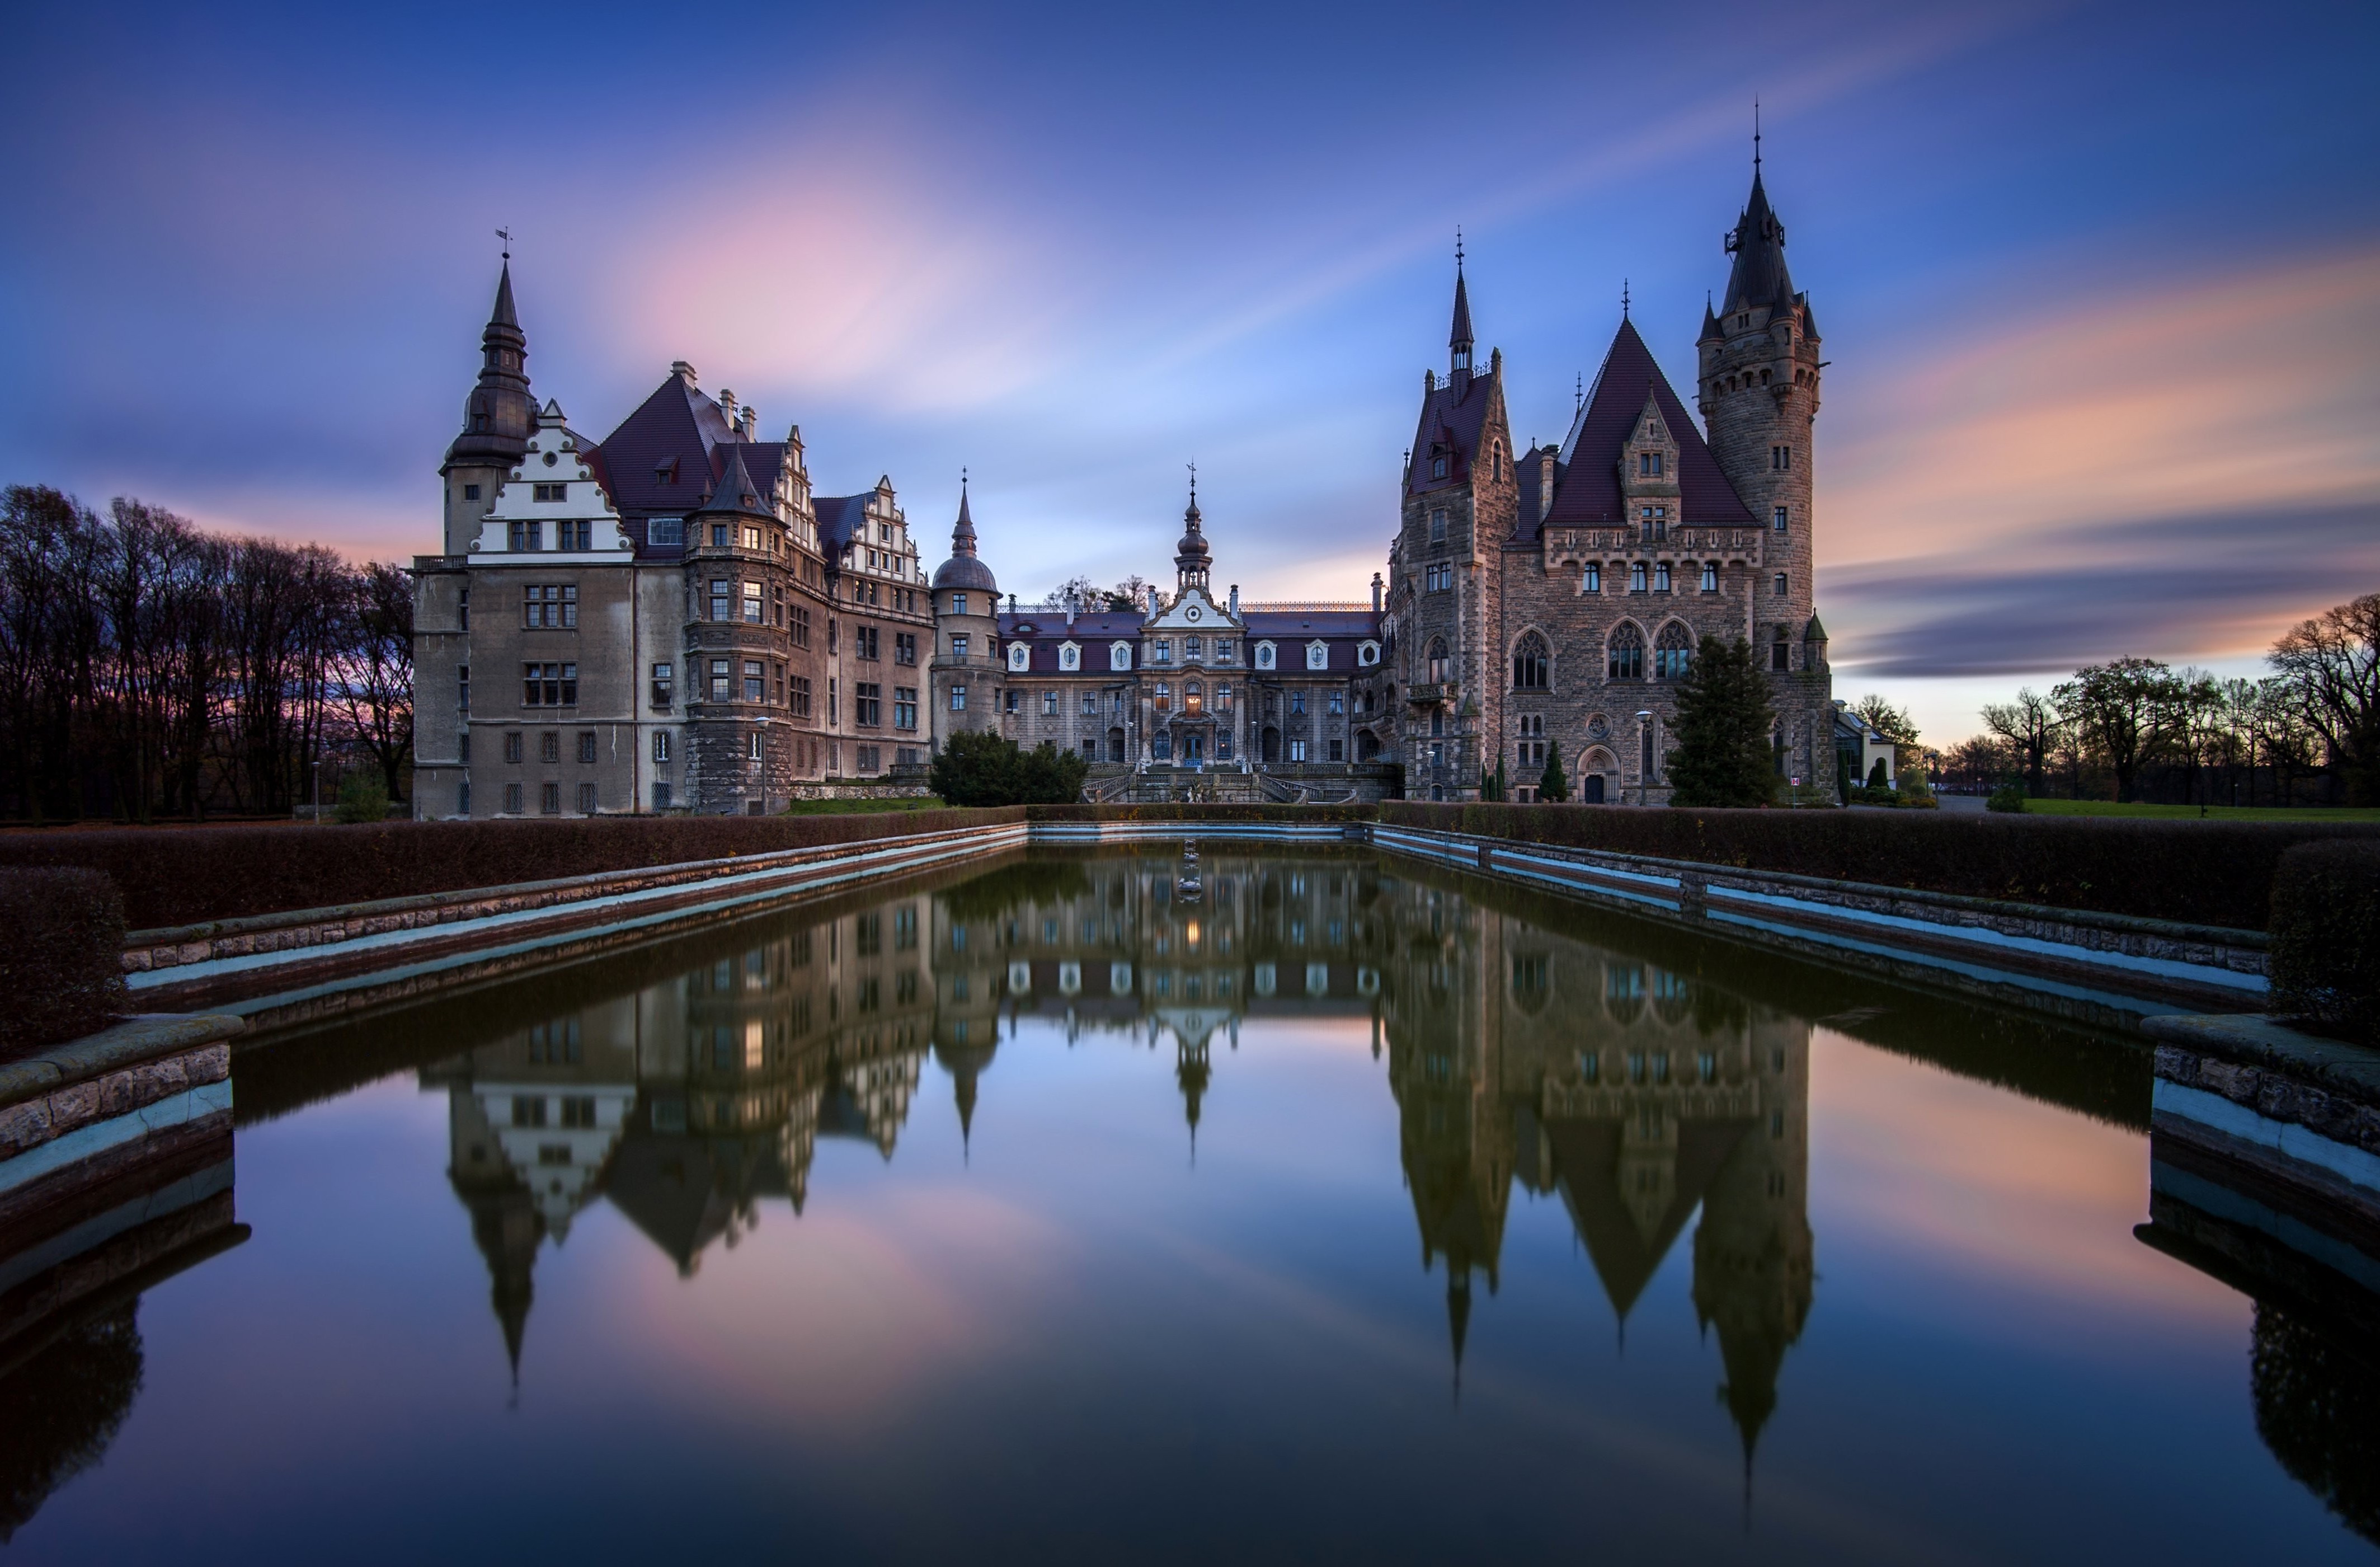 night, Lights, Architecture, Old building, Sky, Water, Reflection, Long exposure, Castle, Poland, Trees, Sunset Wallpaper